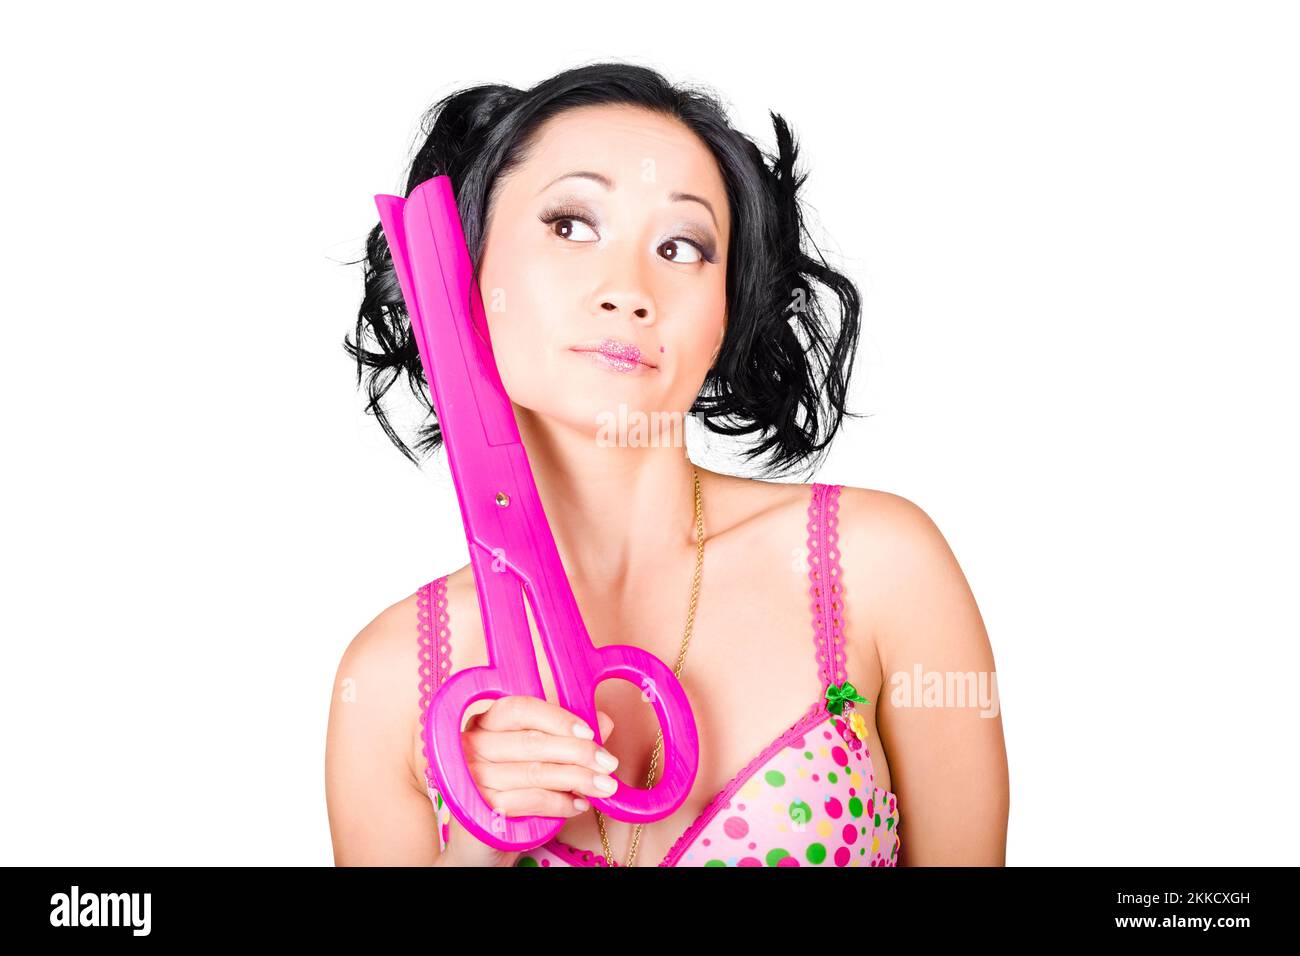 Quirky hairdressing photo of a young woman barber holding large pink scissors while thinking up a retro do Stock Photo